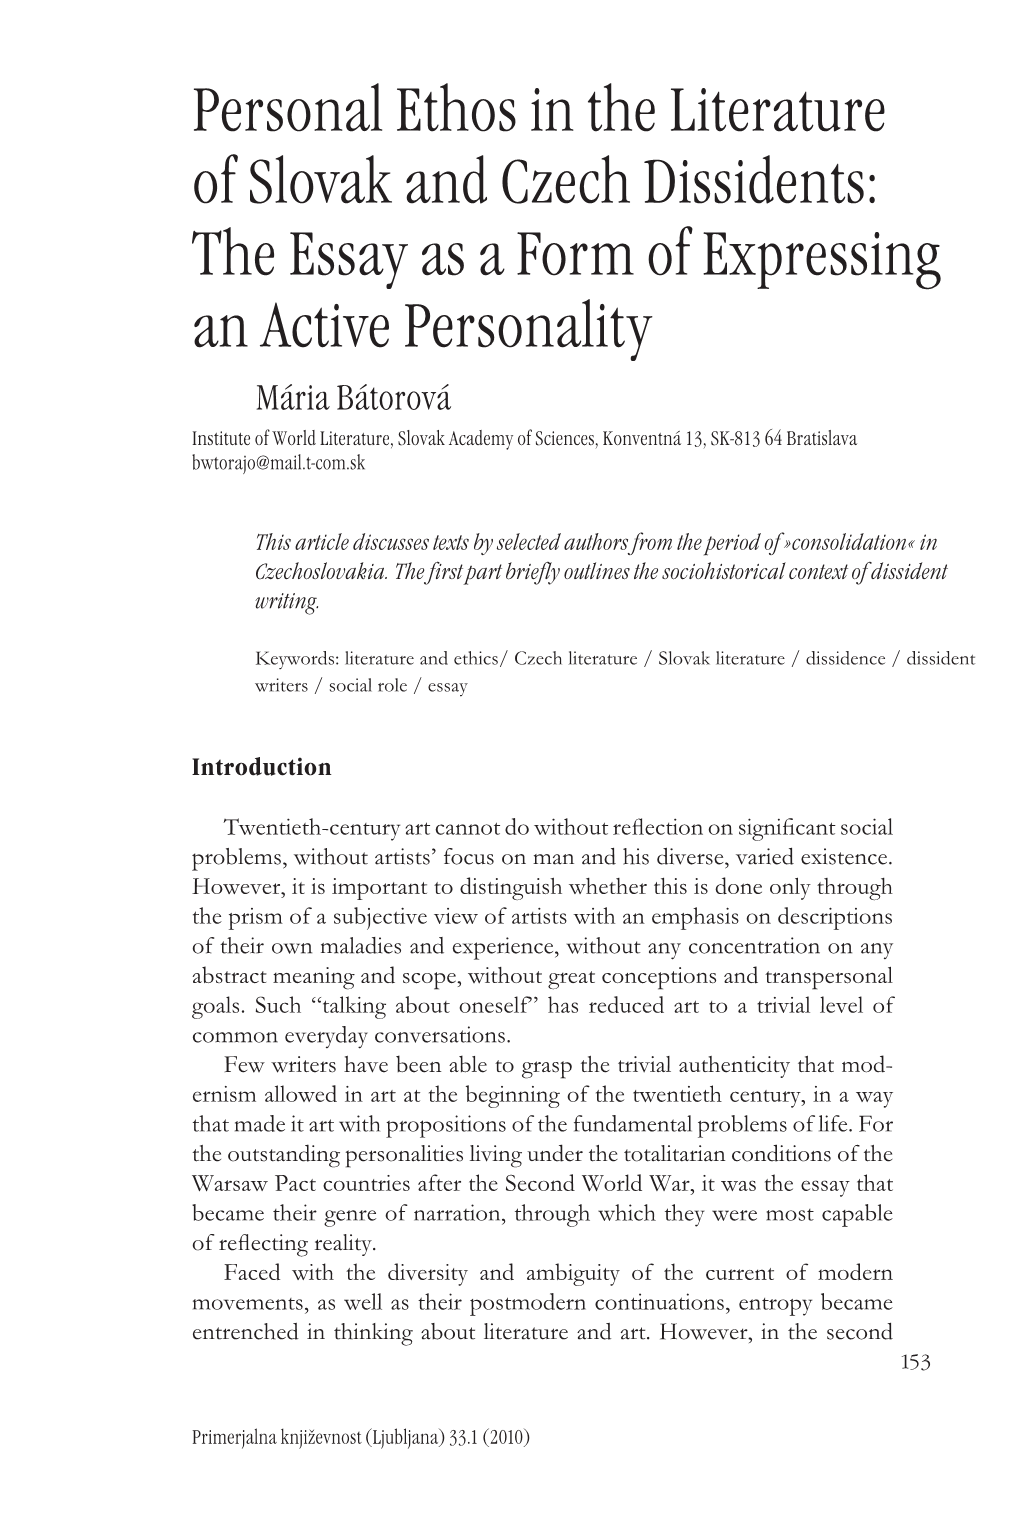 The Essay As a Form of Expressing an Active Personality